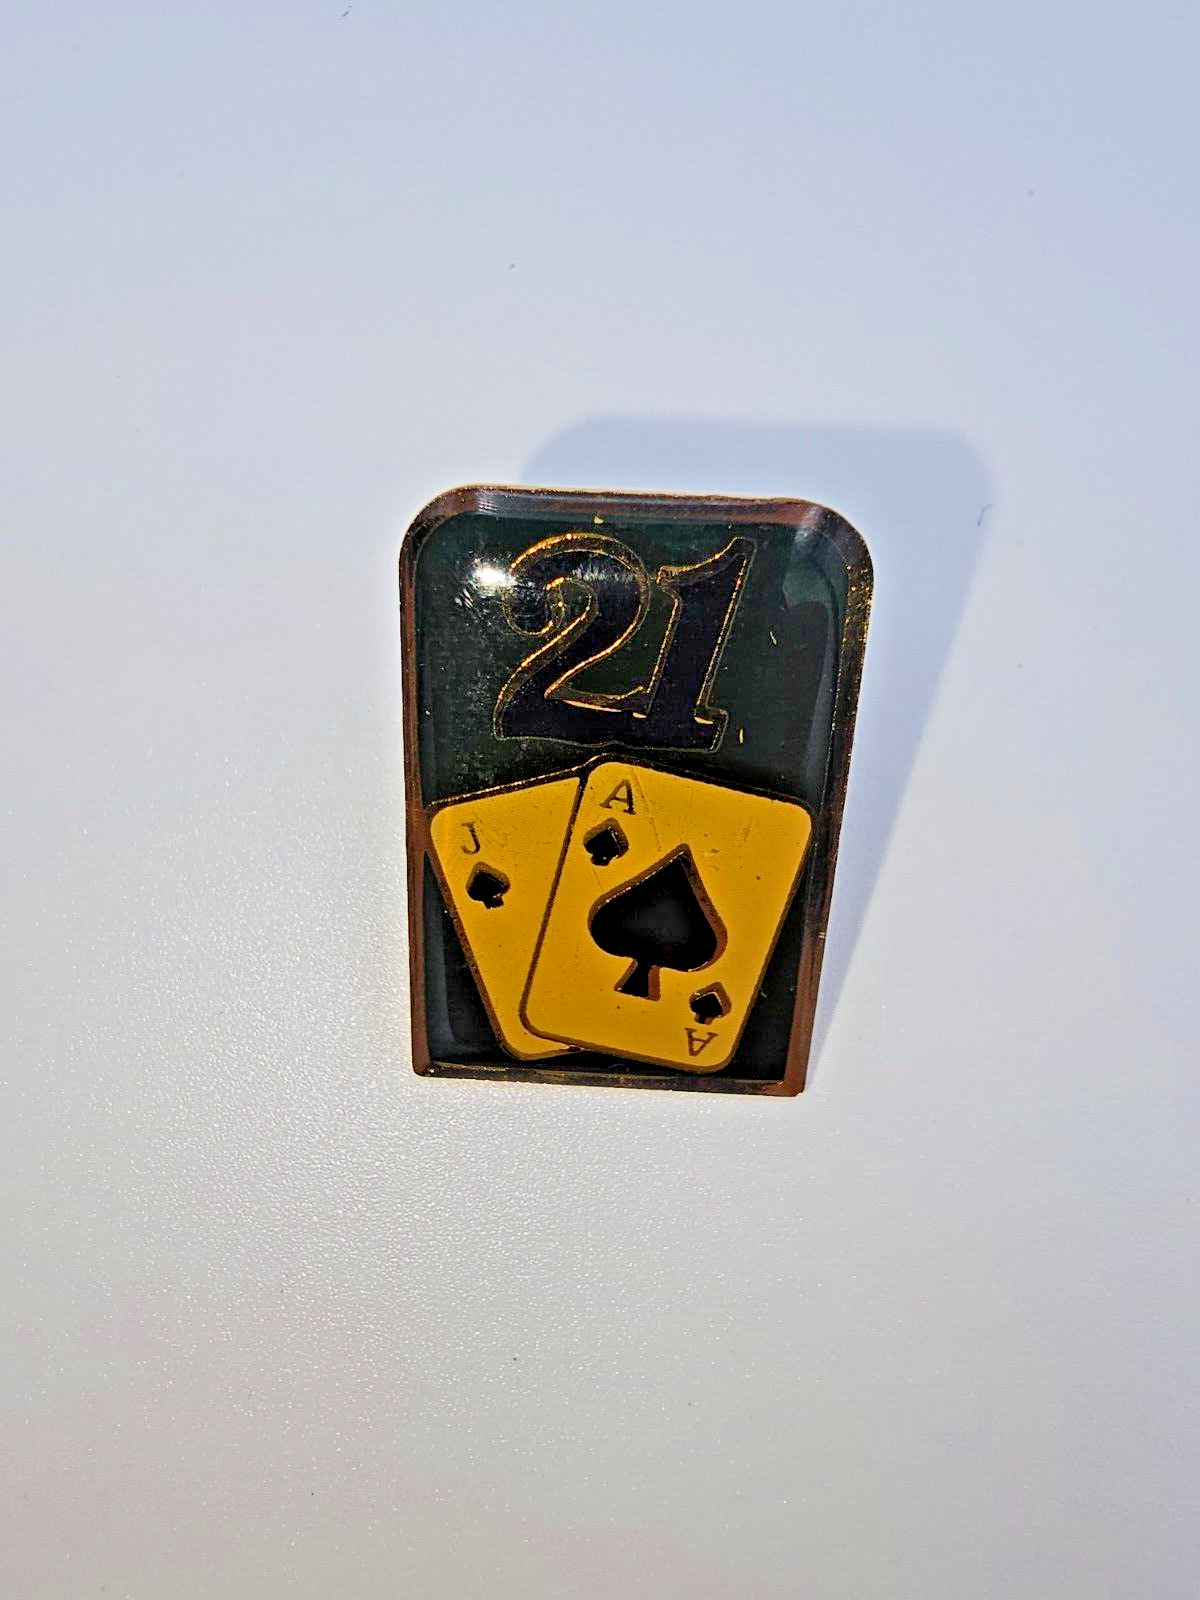 Pin 21 Blackjack Ace And Jack of Spades Cards Hat Lapel Motorcycle Casino New